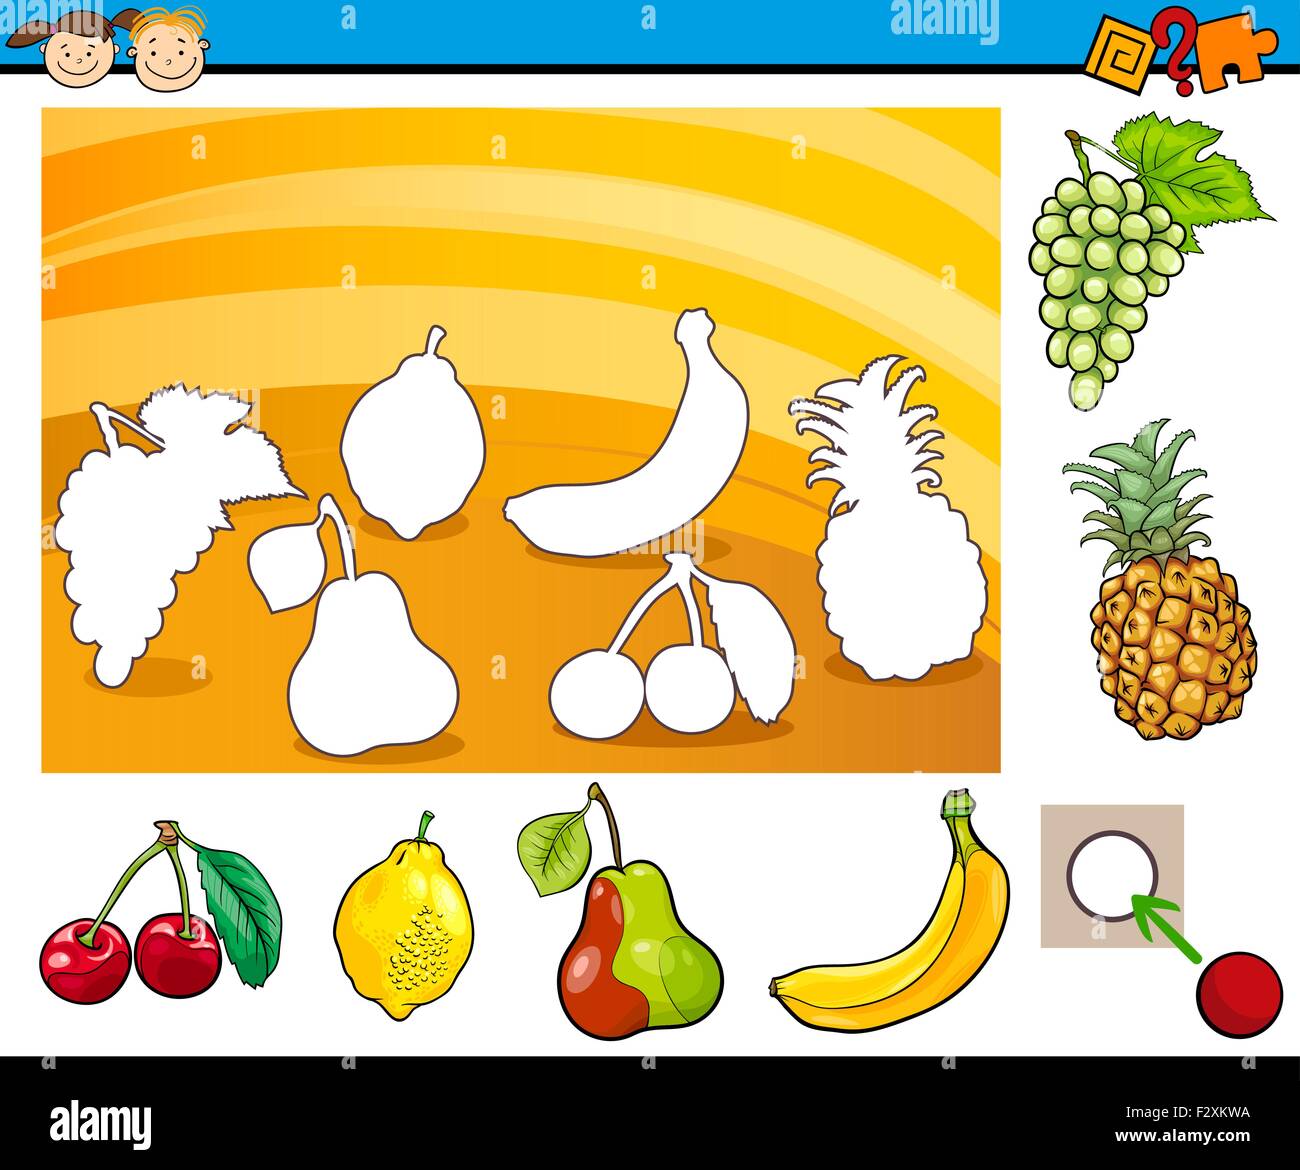 Cartoon Illustration of Educational Game for Preschool Children with Fruits Stock Vector